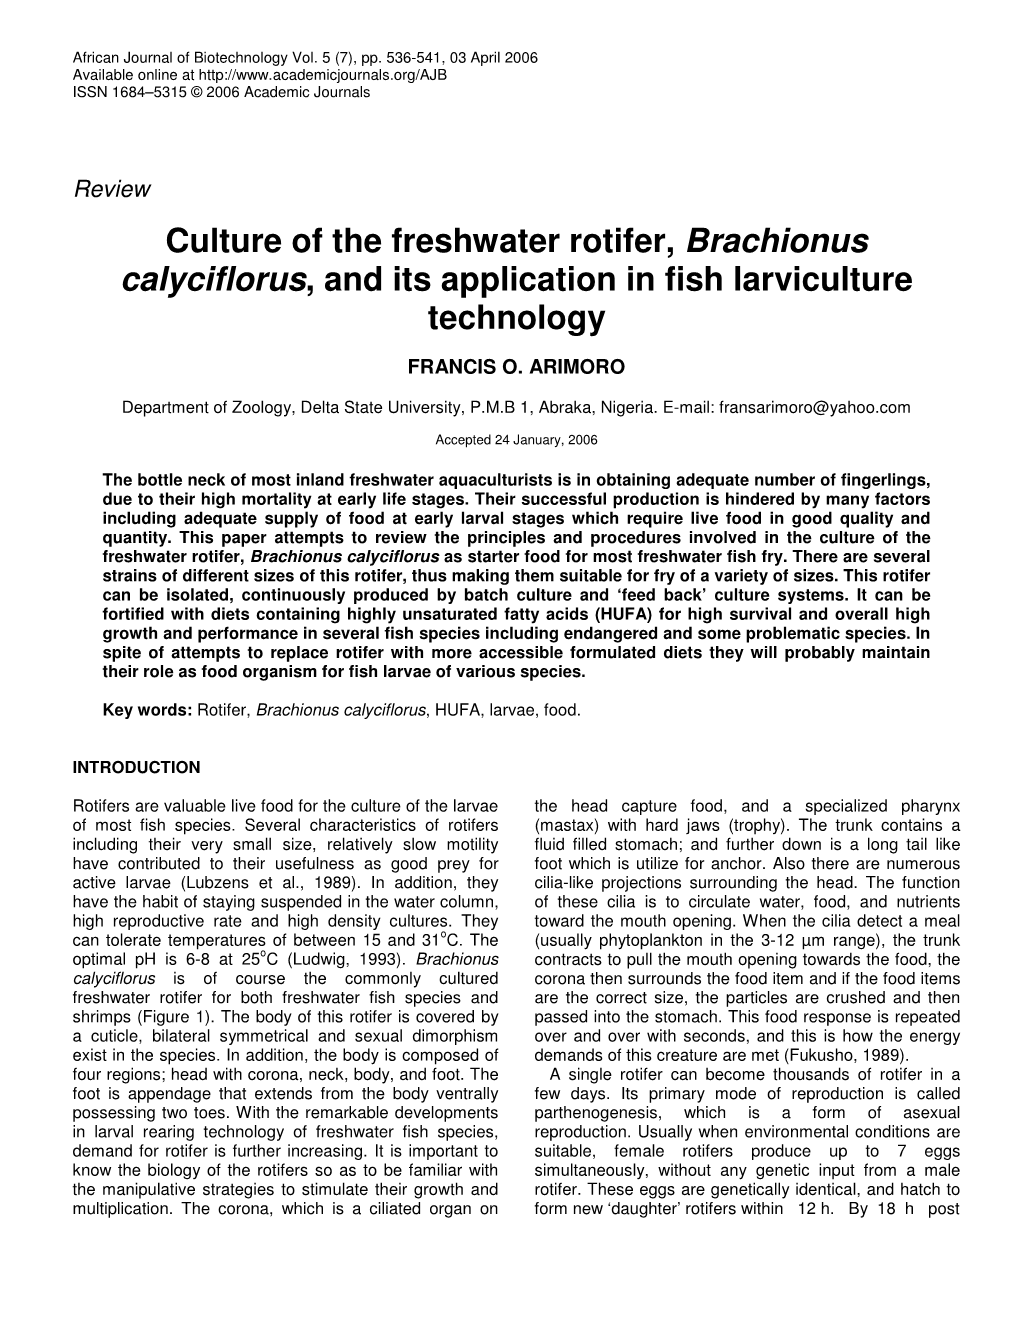 Culture of the Freshwater Rotifer, Brachionus Calyciflorus, and Its Application in Fish Larviculture Technology